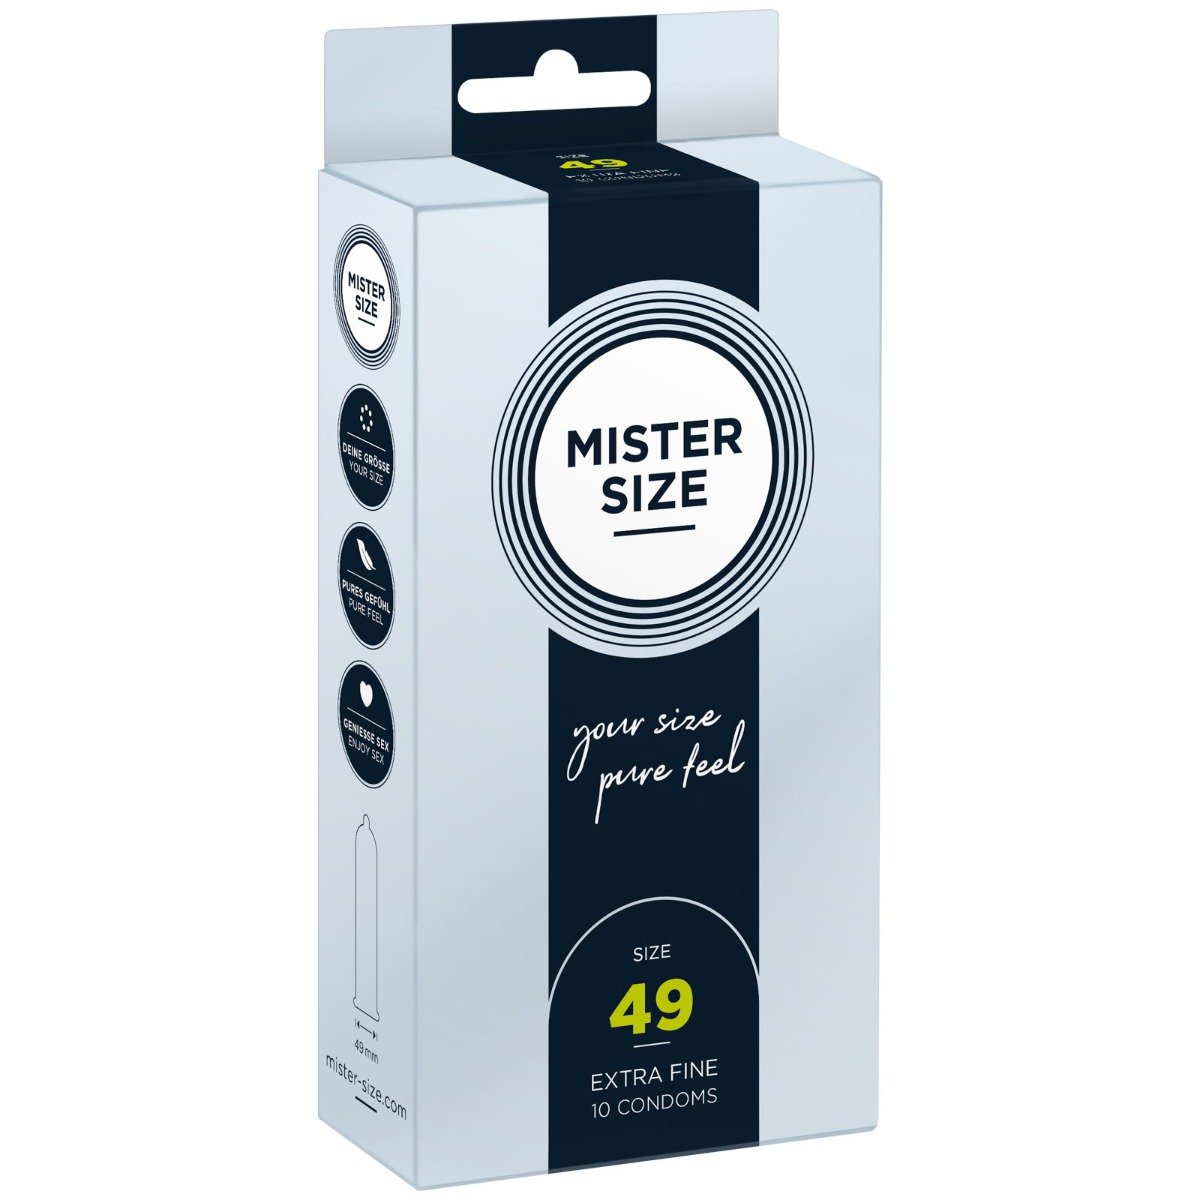 MISTER SIZE - pure feel - Size 49 mm (10 pack)